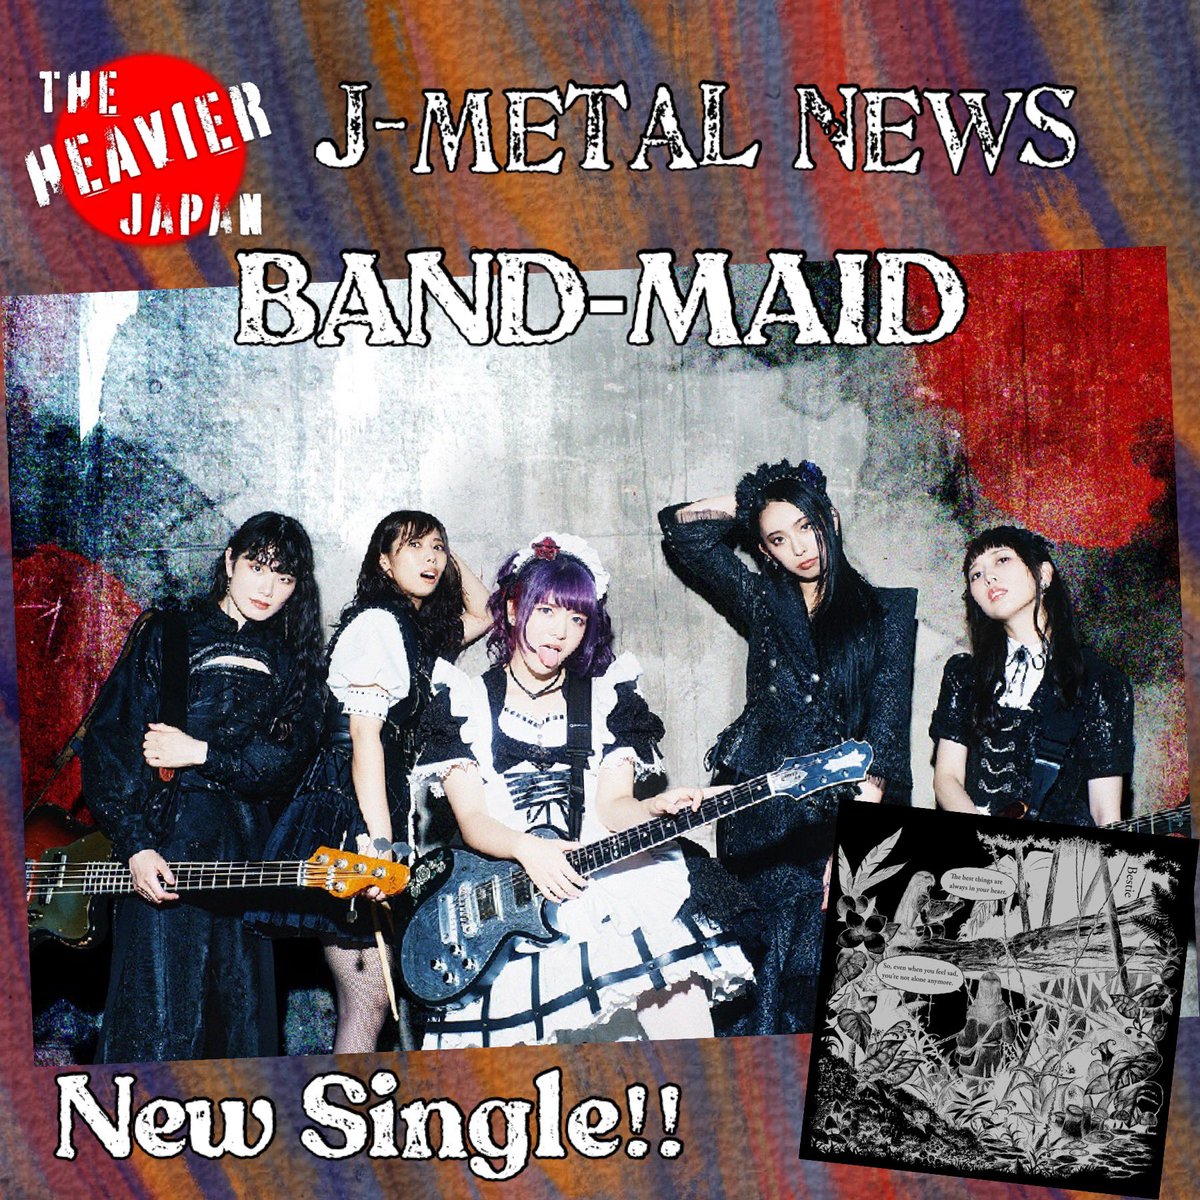 #jmetalnews BAND-MAID release new song titled “Bestie' worldwide today!! The song is co-written with Mike Einziger of INCUBUS!! BAND-MAID.lnk.to/Bestie @bandmaid #japanesemetal #jrock #jmetal #heavymetal #femalemetal #bandmaid